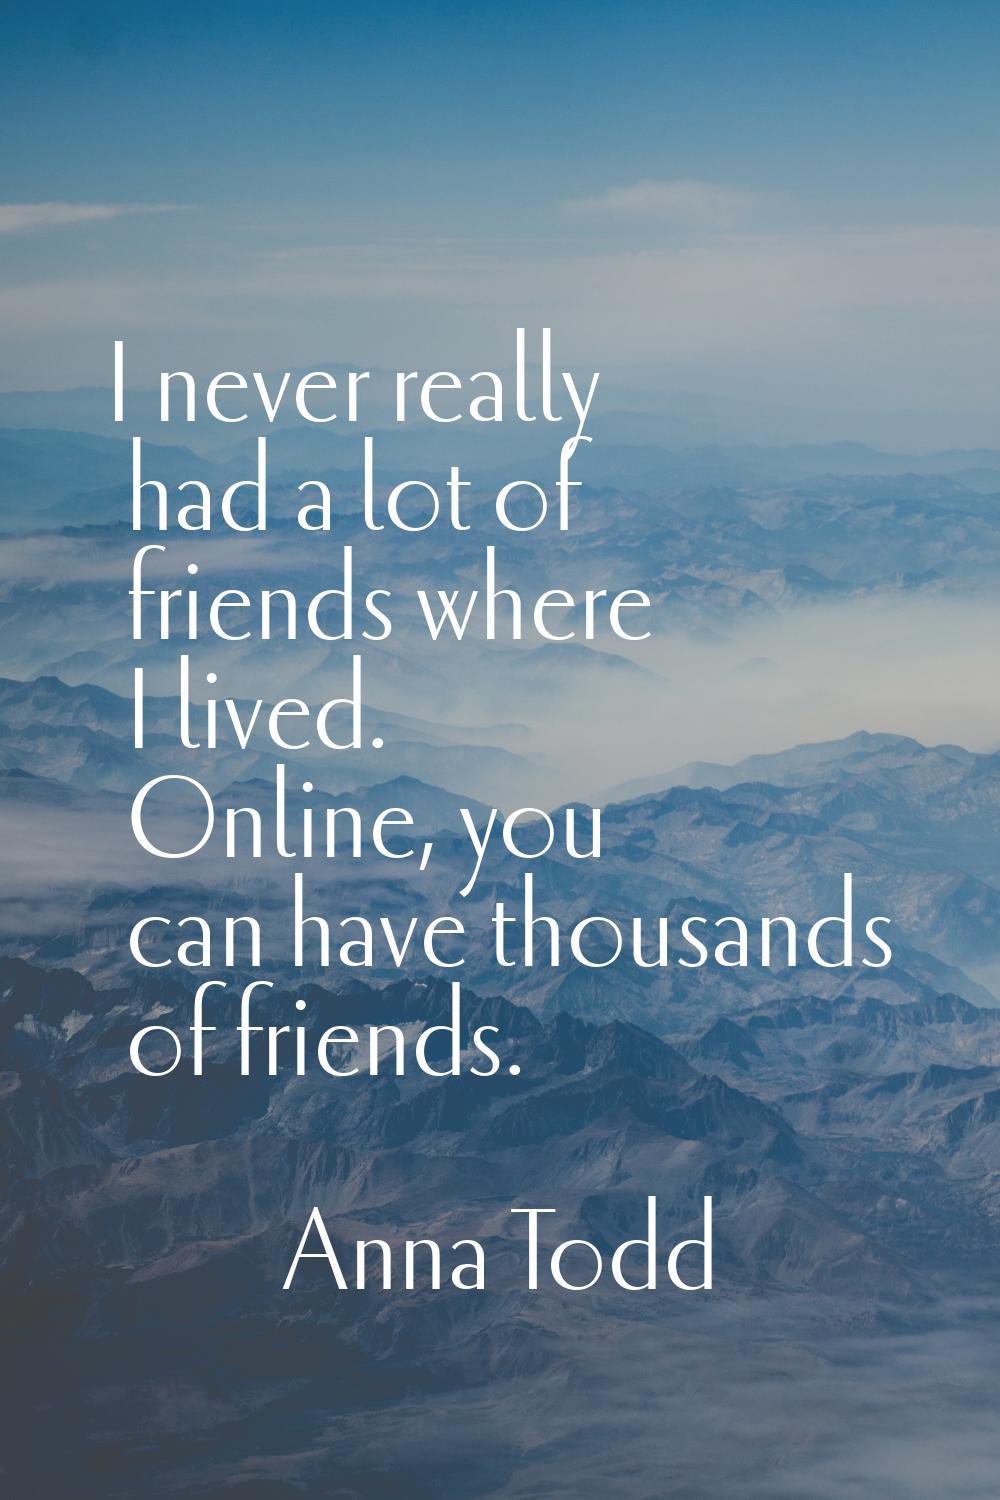 I never really had a lot of friends where I lived. Online, you can have thousands of friends.